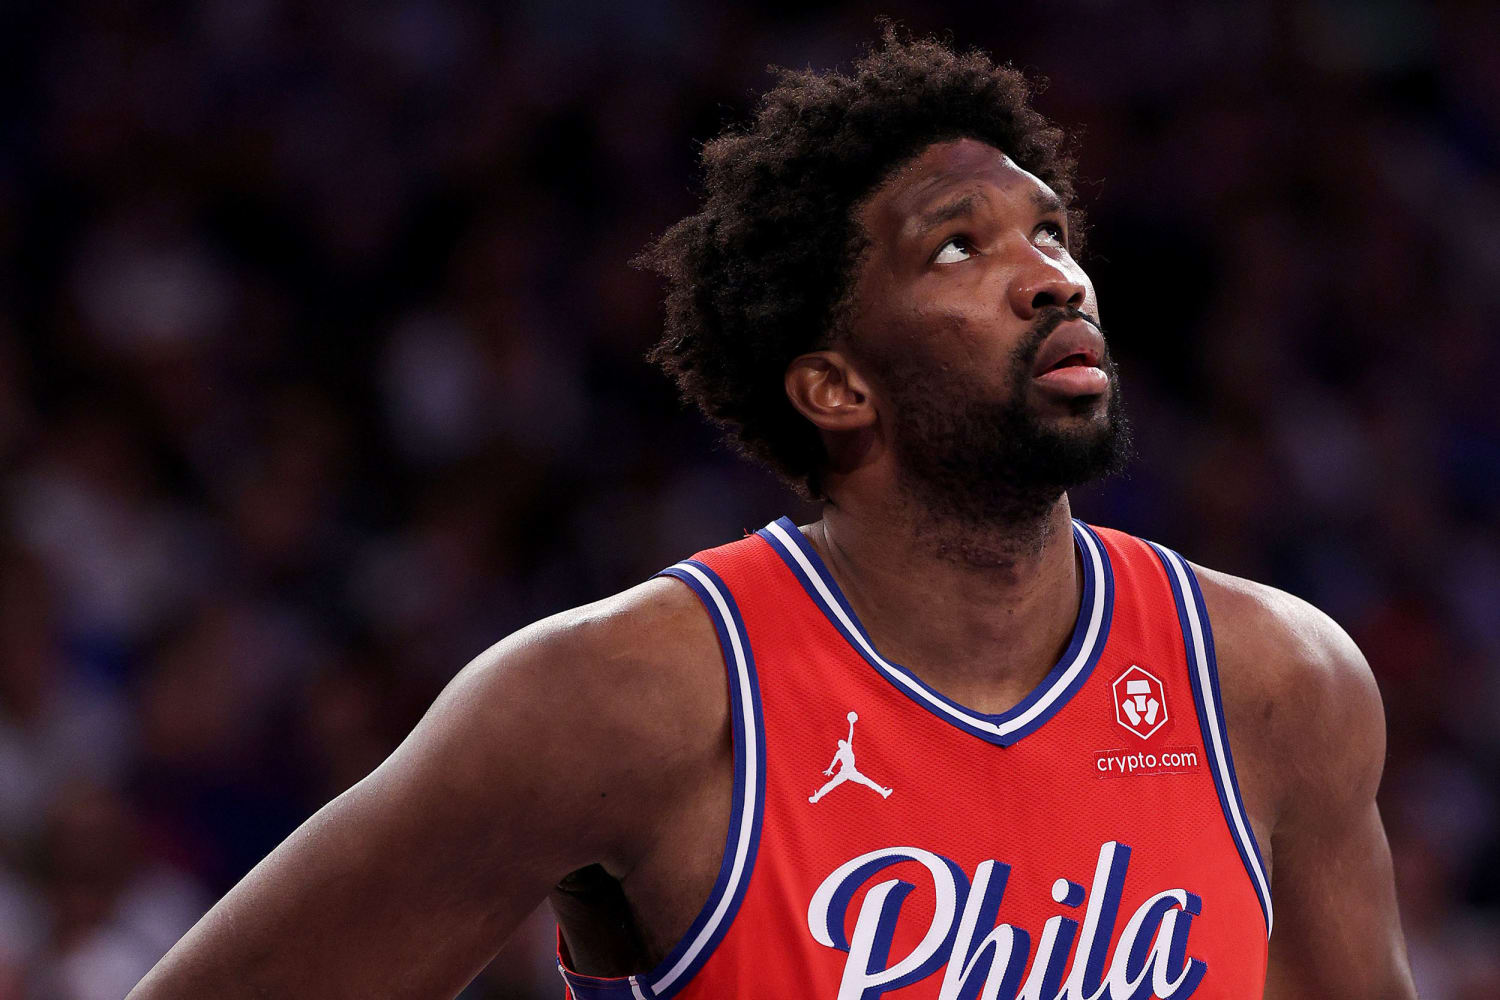 76ers All-Star Joel Embiid says he has Bell's argument